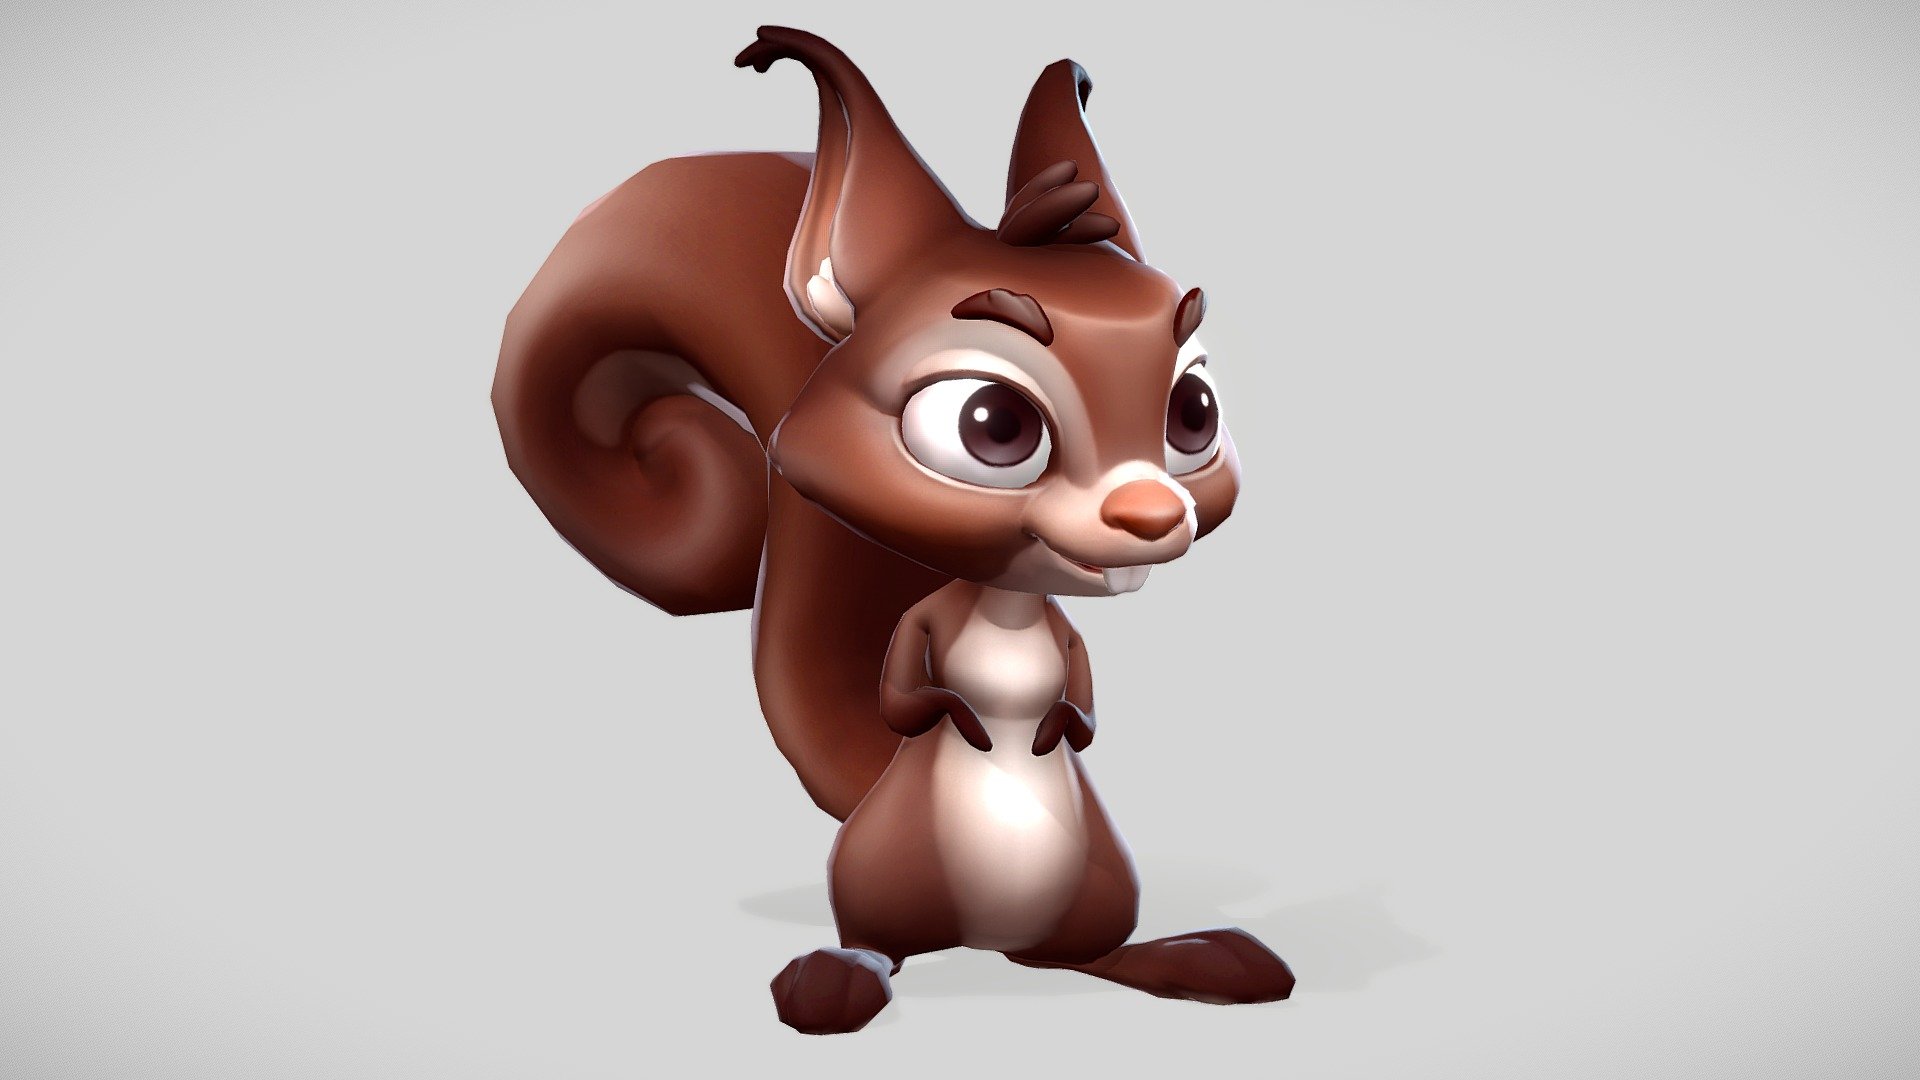 This is a cartoon squirrel

Comes with the following animations:




Idle

Idle2

Walk

Run

Roll

Success

Failure

Talk

Sleep

Jump Up

Fall

Land On Ground

Kick

Get Damage

Pick Up

Carry Idle

Carry Walk

Throw Item

Triangle Count: 7710

Offered File Format: FBX

This characters contain no blendshapes. Facial animation is handled with bone animation.

Texture Size 2048x2048 (Both for color and normals)

For more info contact me: dogzerx@hotmail.com

Thank you! - Squirrel - Buy Royalty Free 3D model by JoseDiaz 3d model